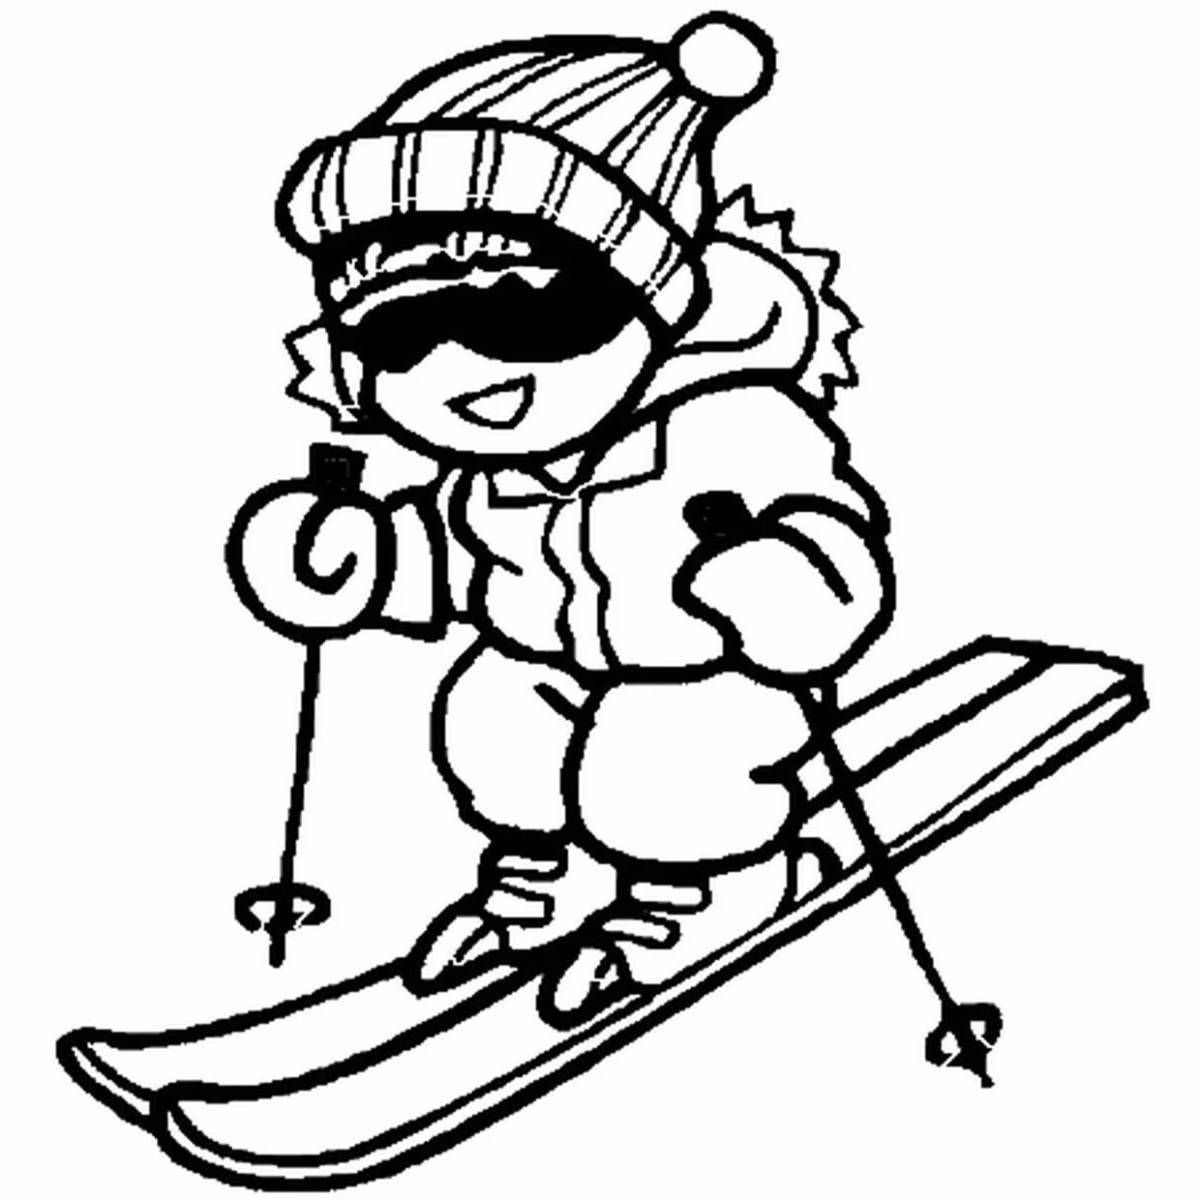 Coloring book ambitious kid skier